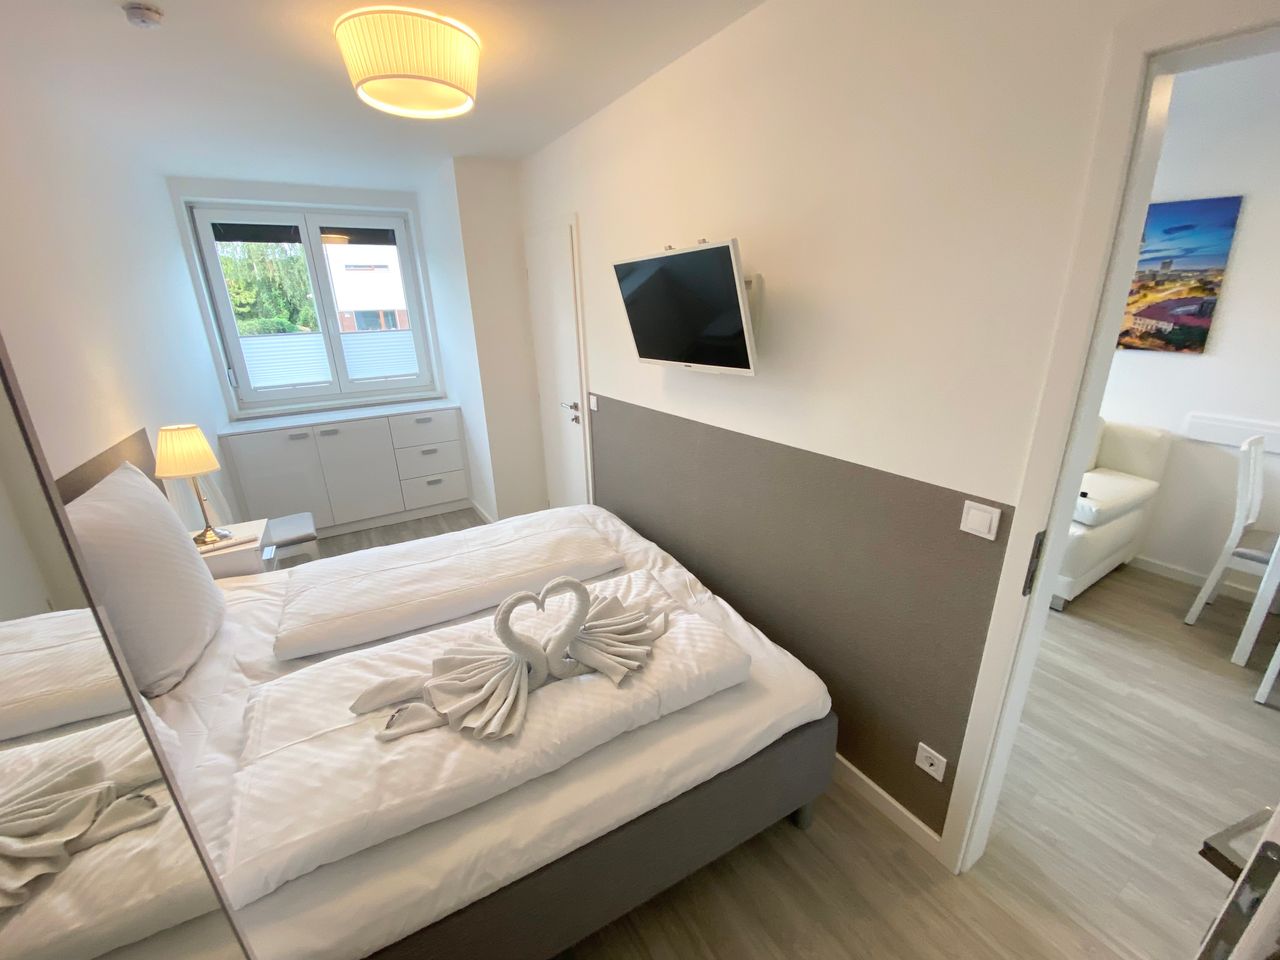 (4A) 2-room apartment with balcony just 5.4 km from Alexanderplatz/free wifi/ in Berlin-Pankow